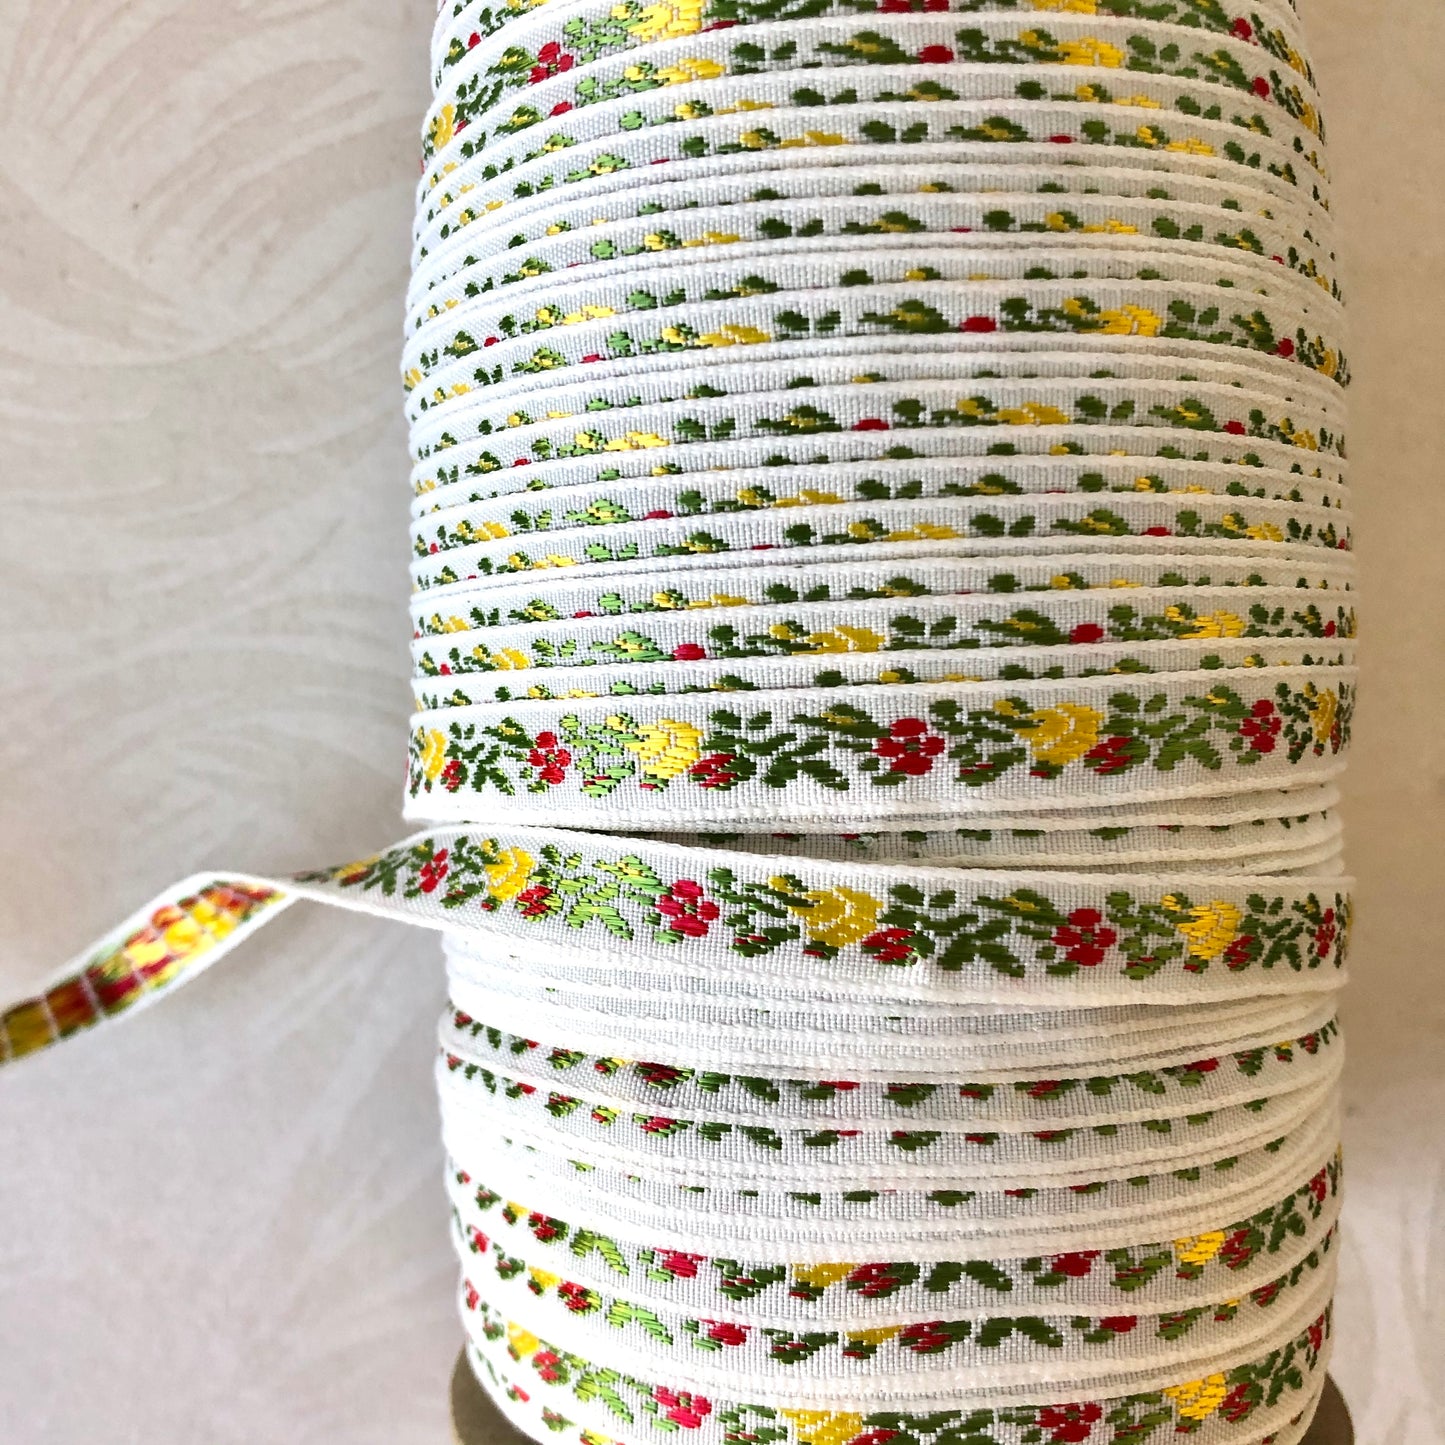 Narrow Floral Embroidered Jacquard Ribbon - Multiple Colorways